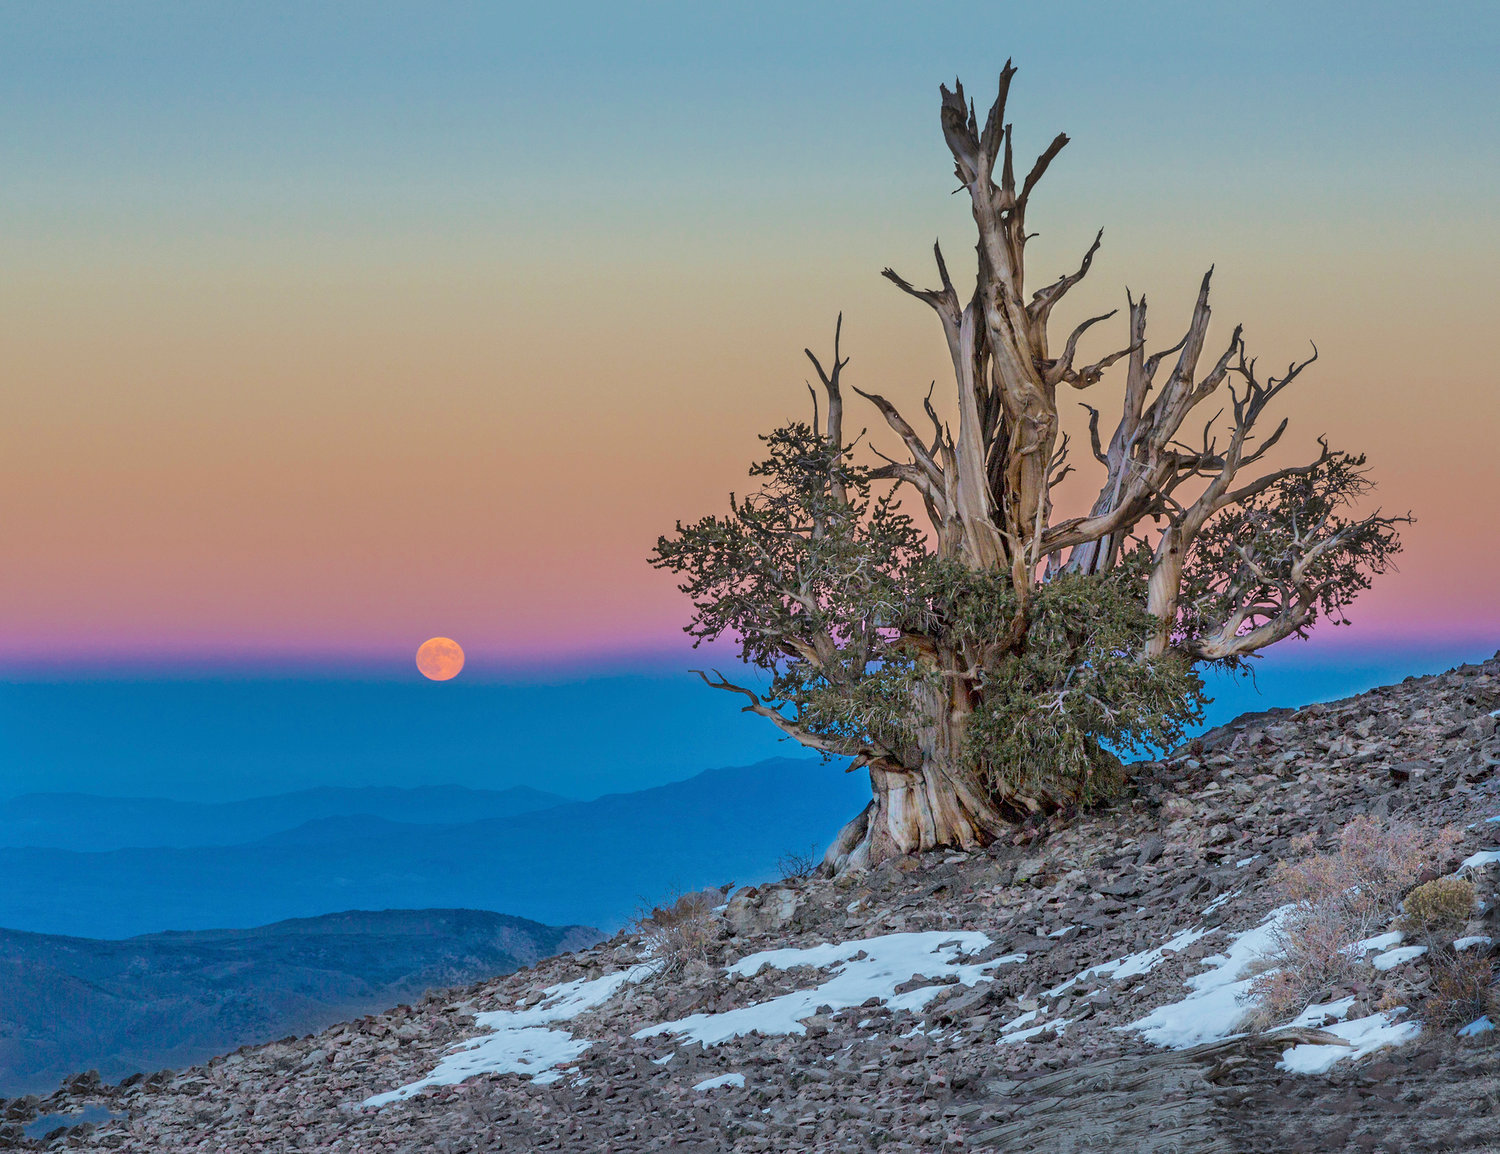 “Bristlecone & Moon” by Don Jacobson, a photograph in the “Flowers, Trees, & Roots: The Wild World of Plants”  exhibit.